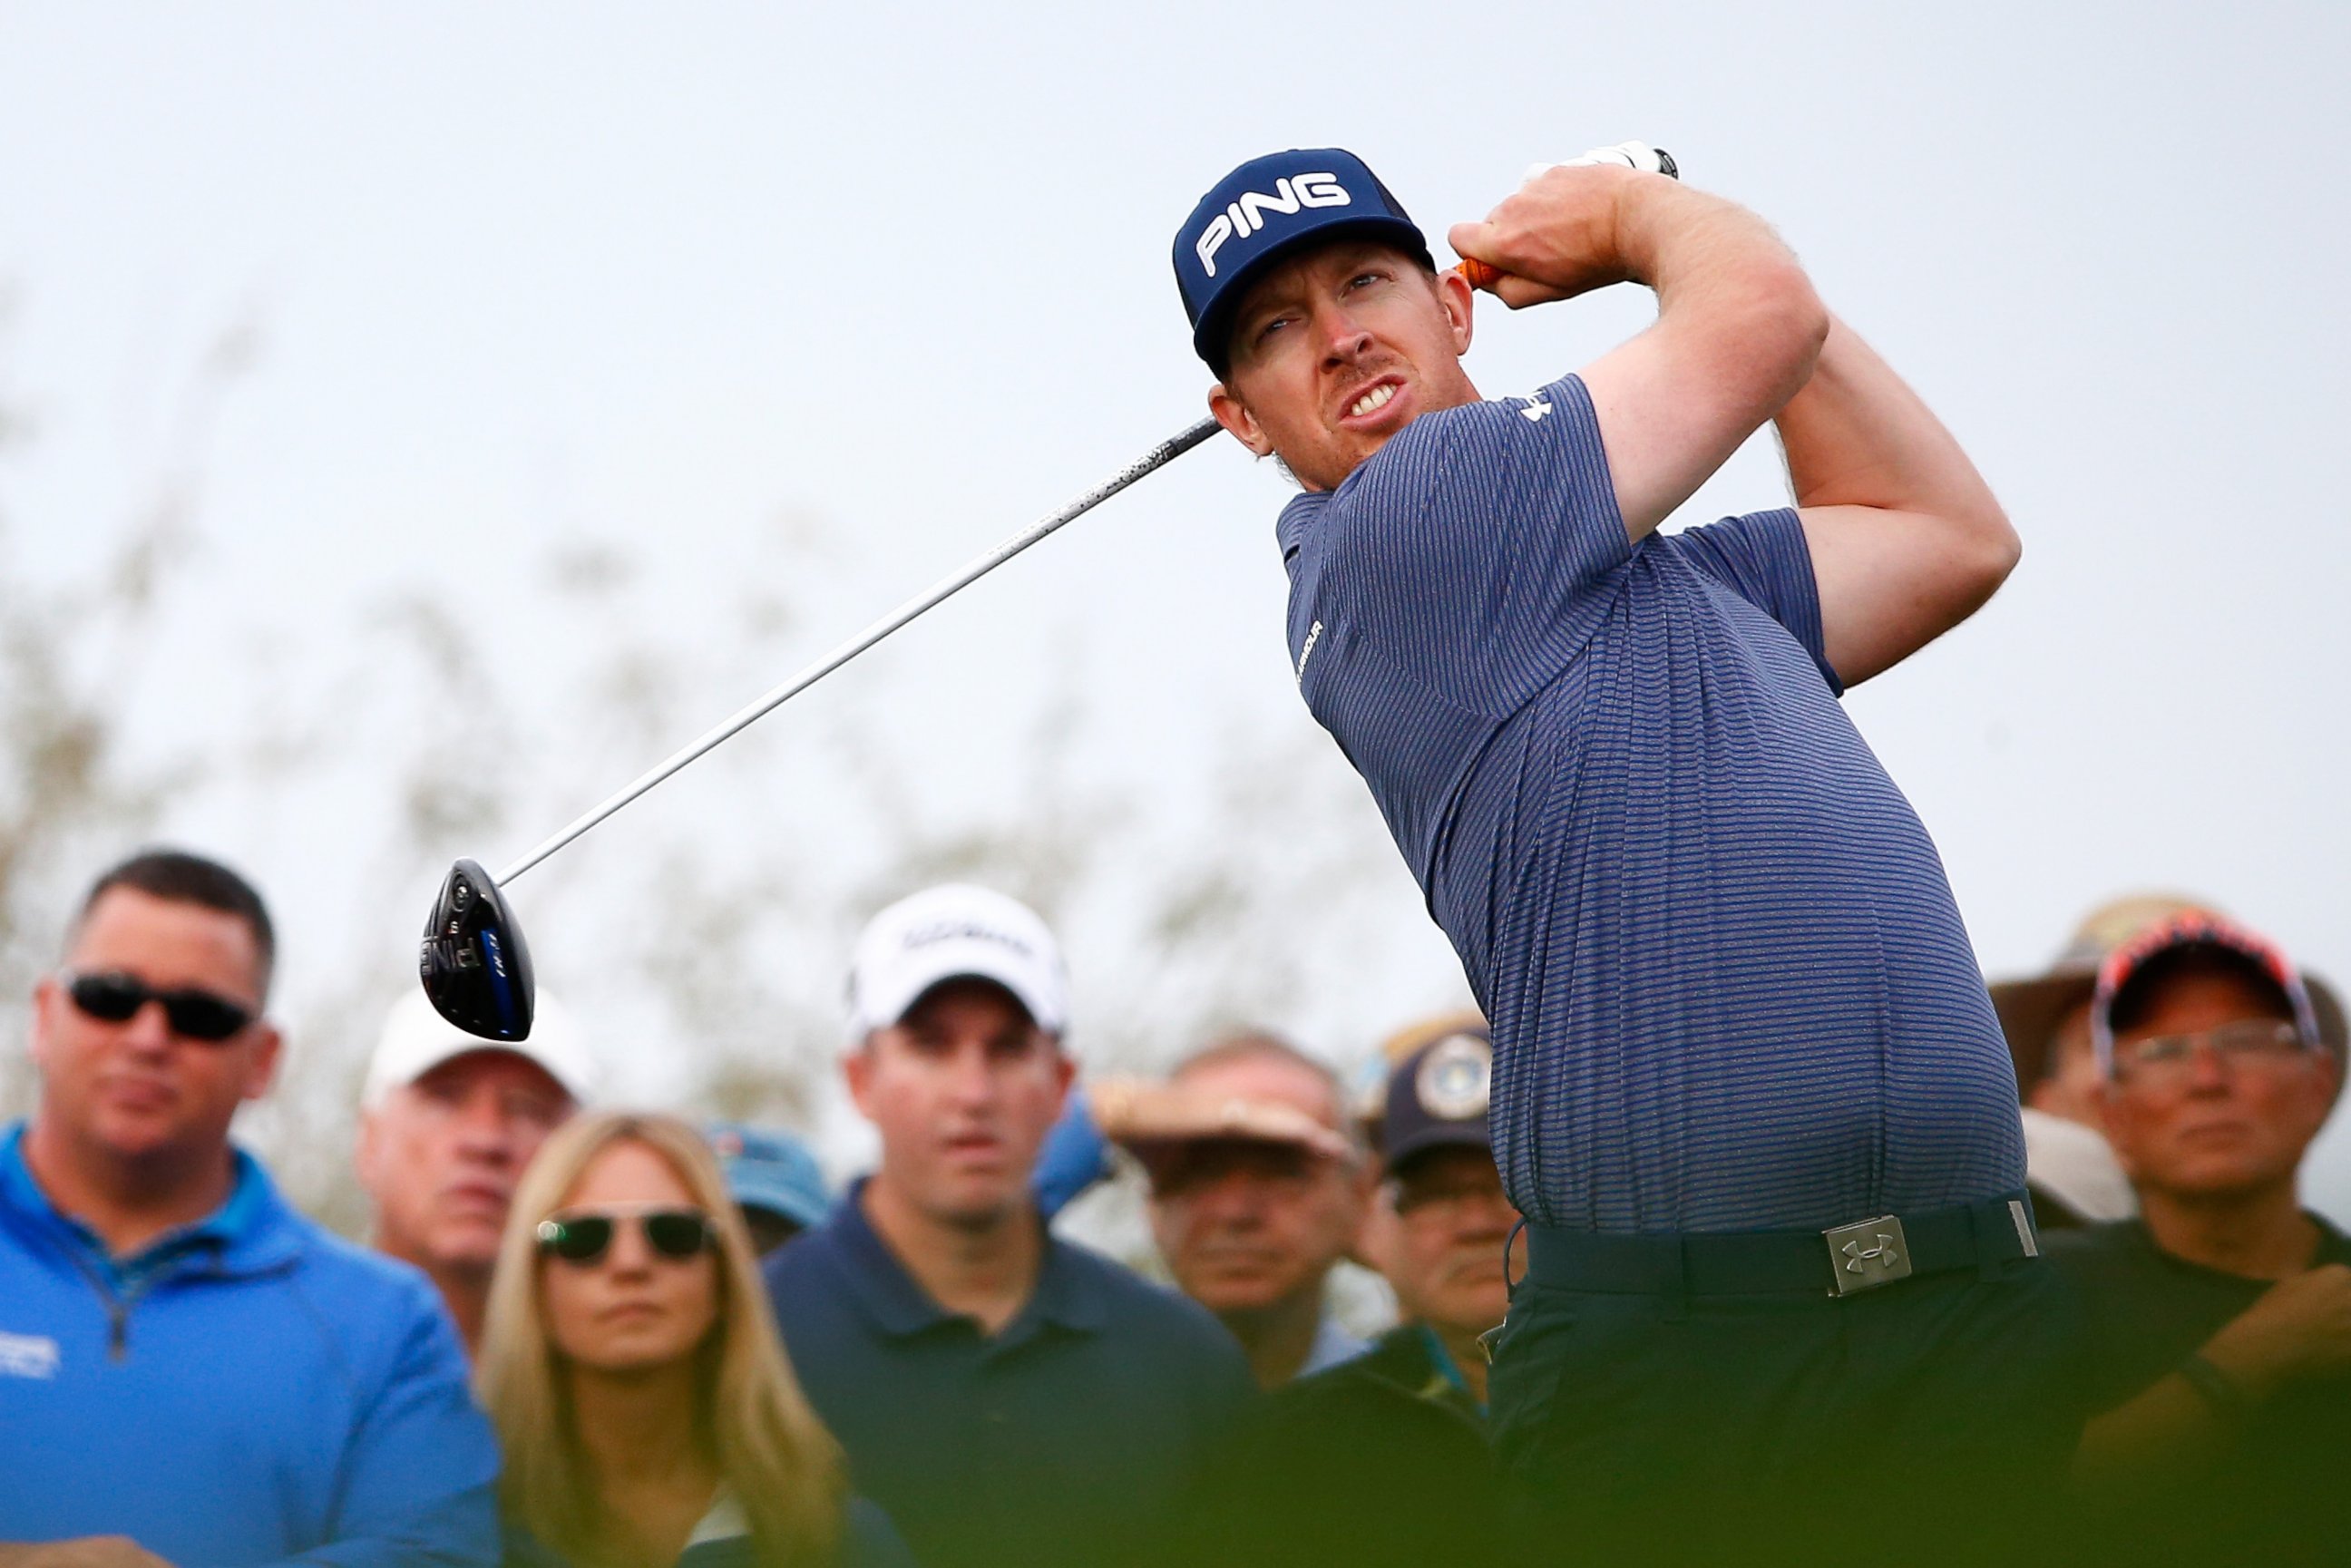 PHOTO: Hunter Mahan hits a tee shot during the first round of the Waste Management Phoenix Open at TPC Scottsdale on Jan. 29, 2015 in Scottsdale, Ariz.